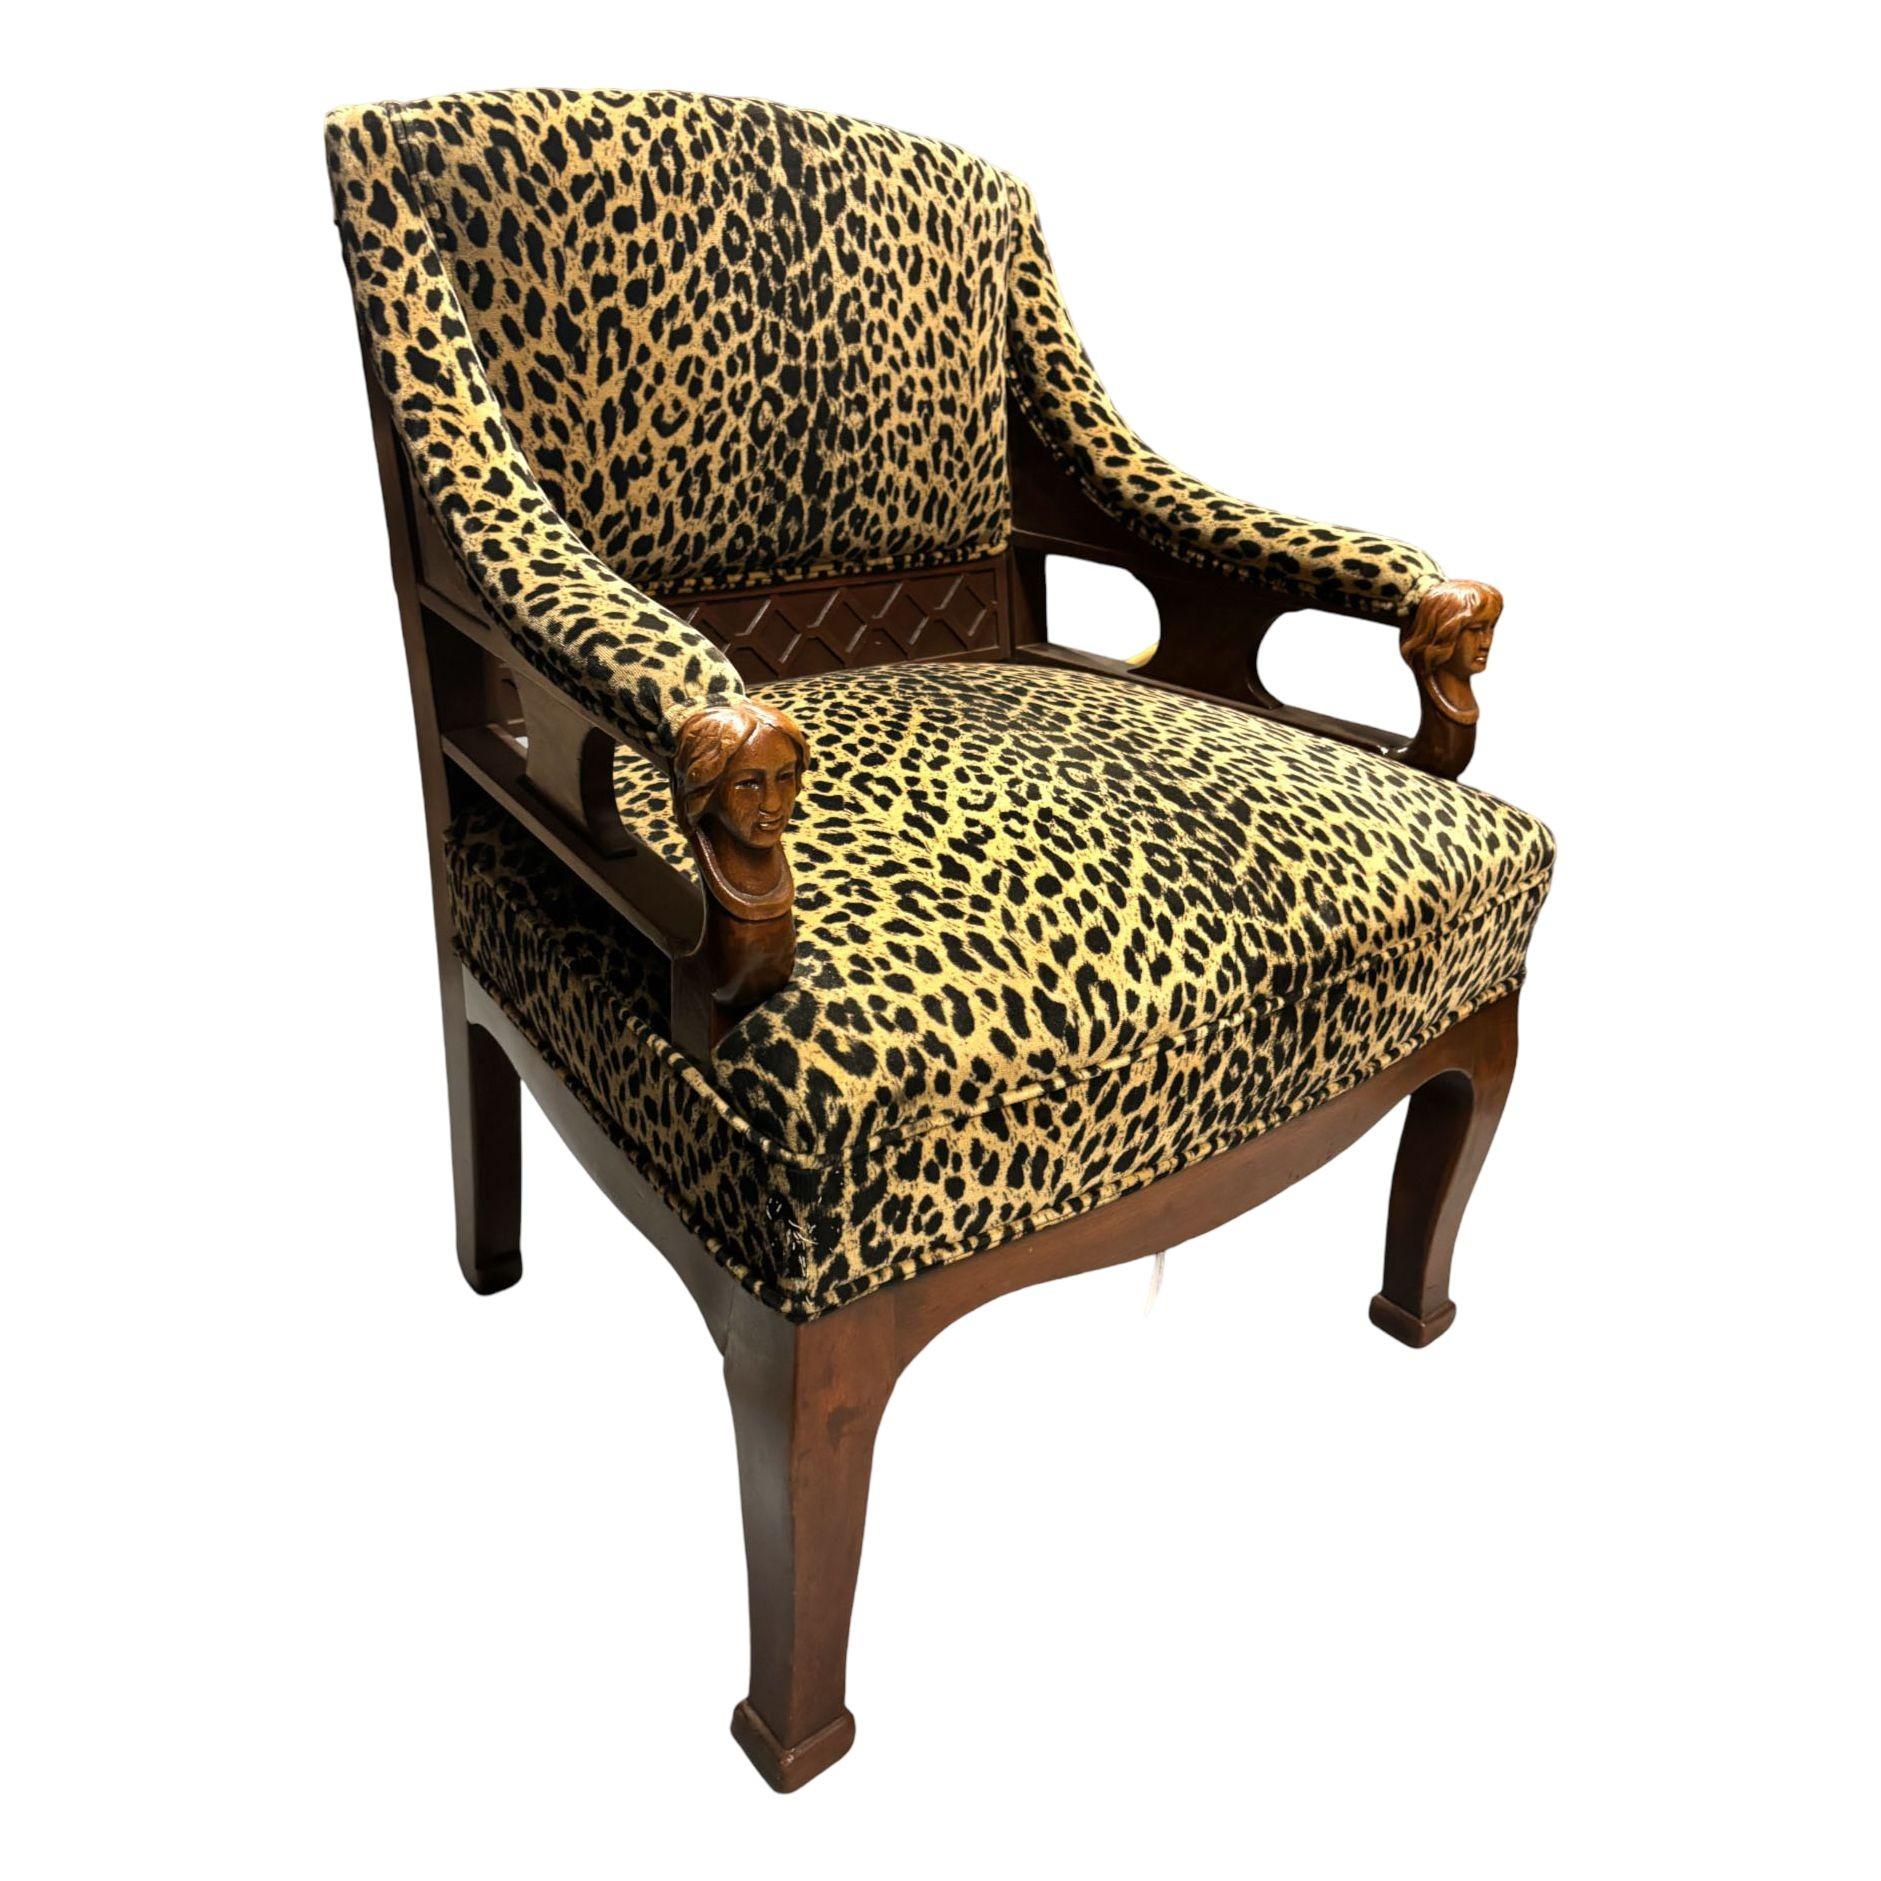 Pair of Rare Hand Carved Empire Style Chairs with Leopard Print Covering In Excellent Condition For Sale In Van Nuys, CA